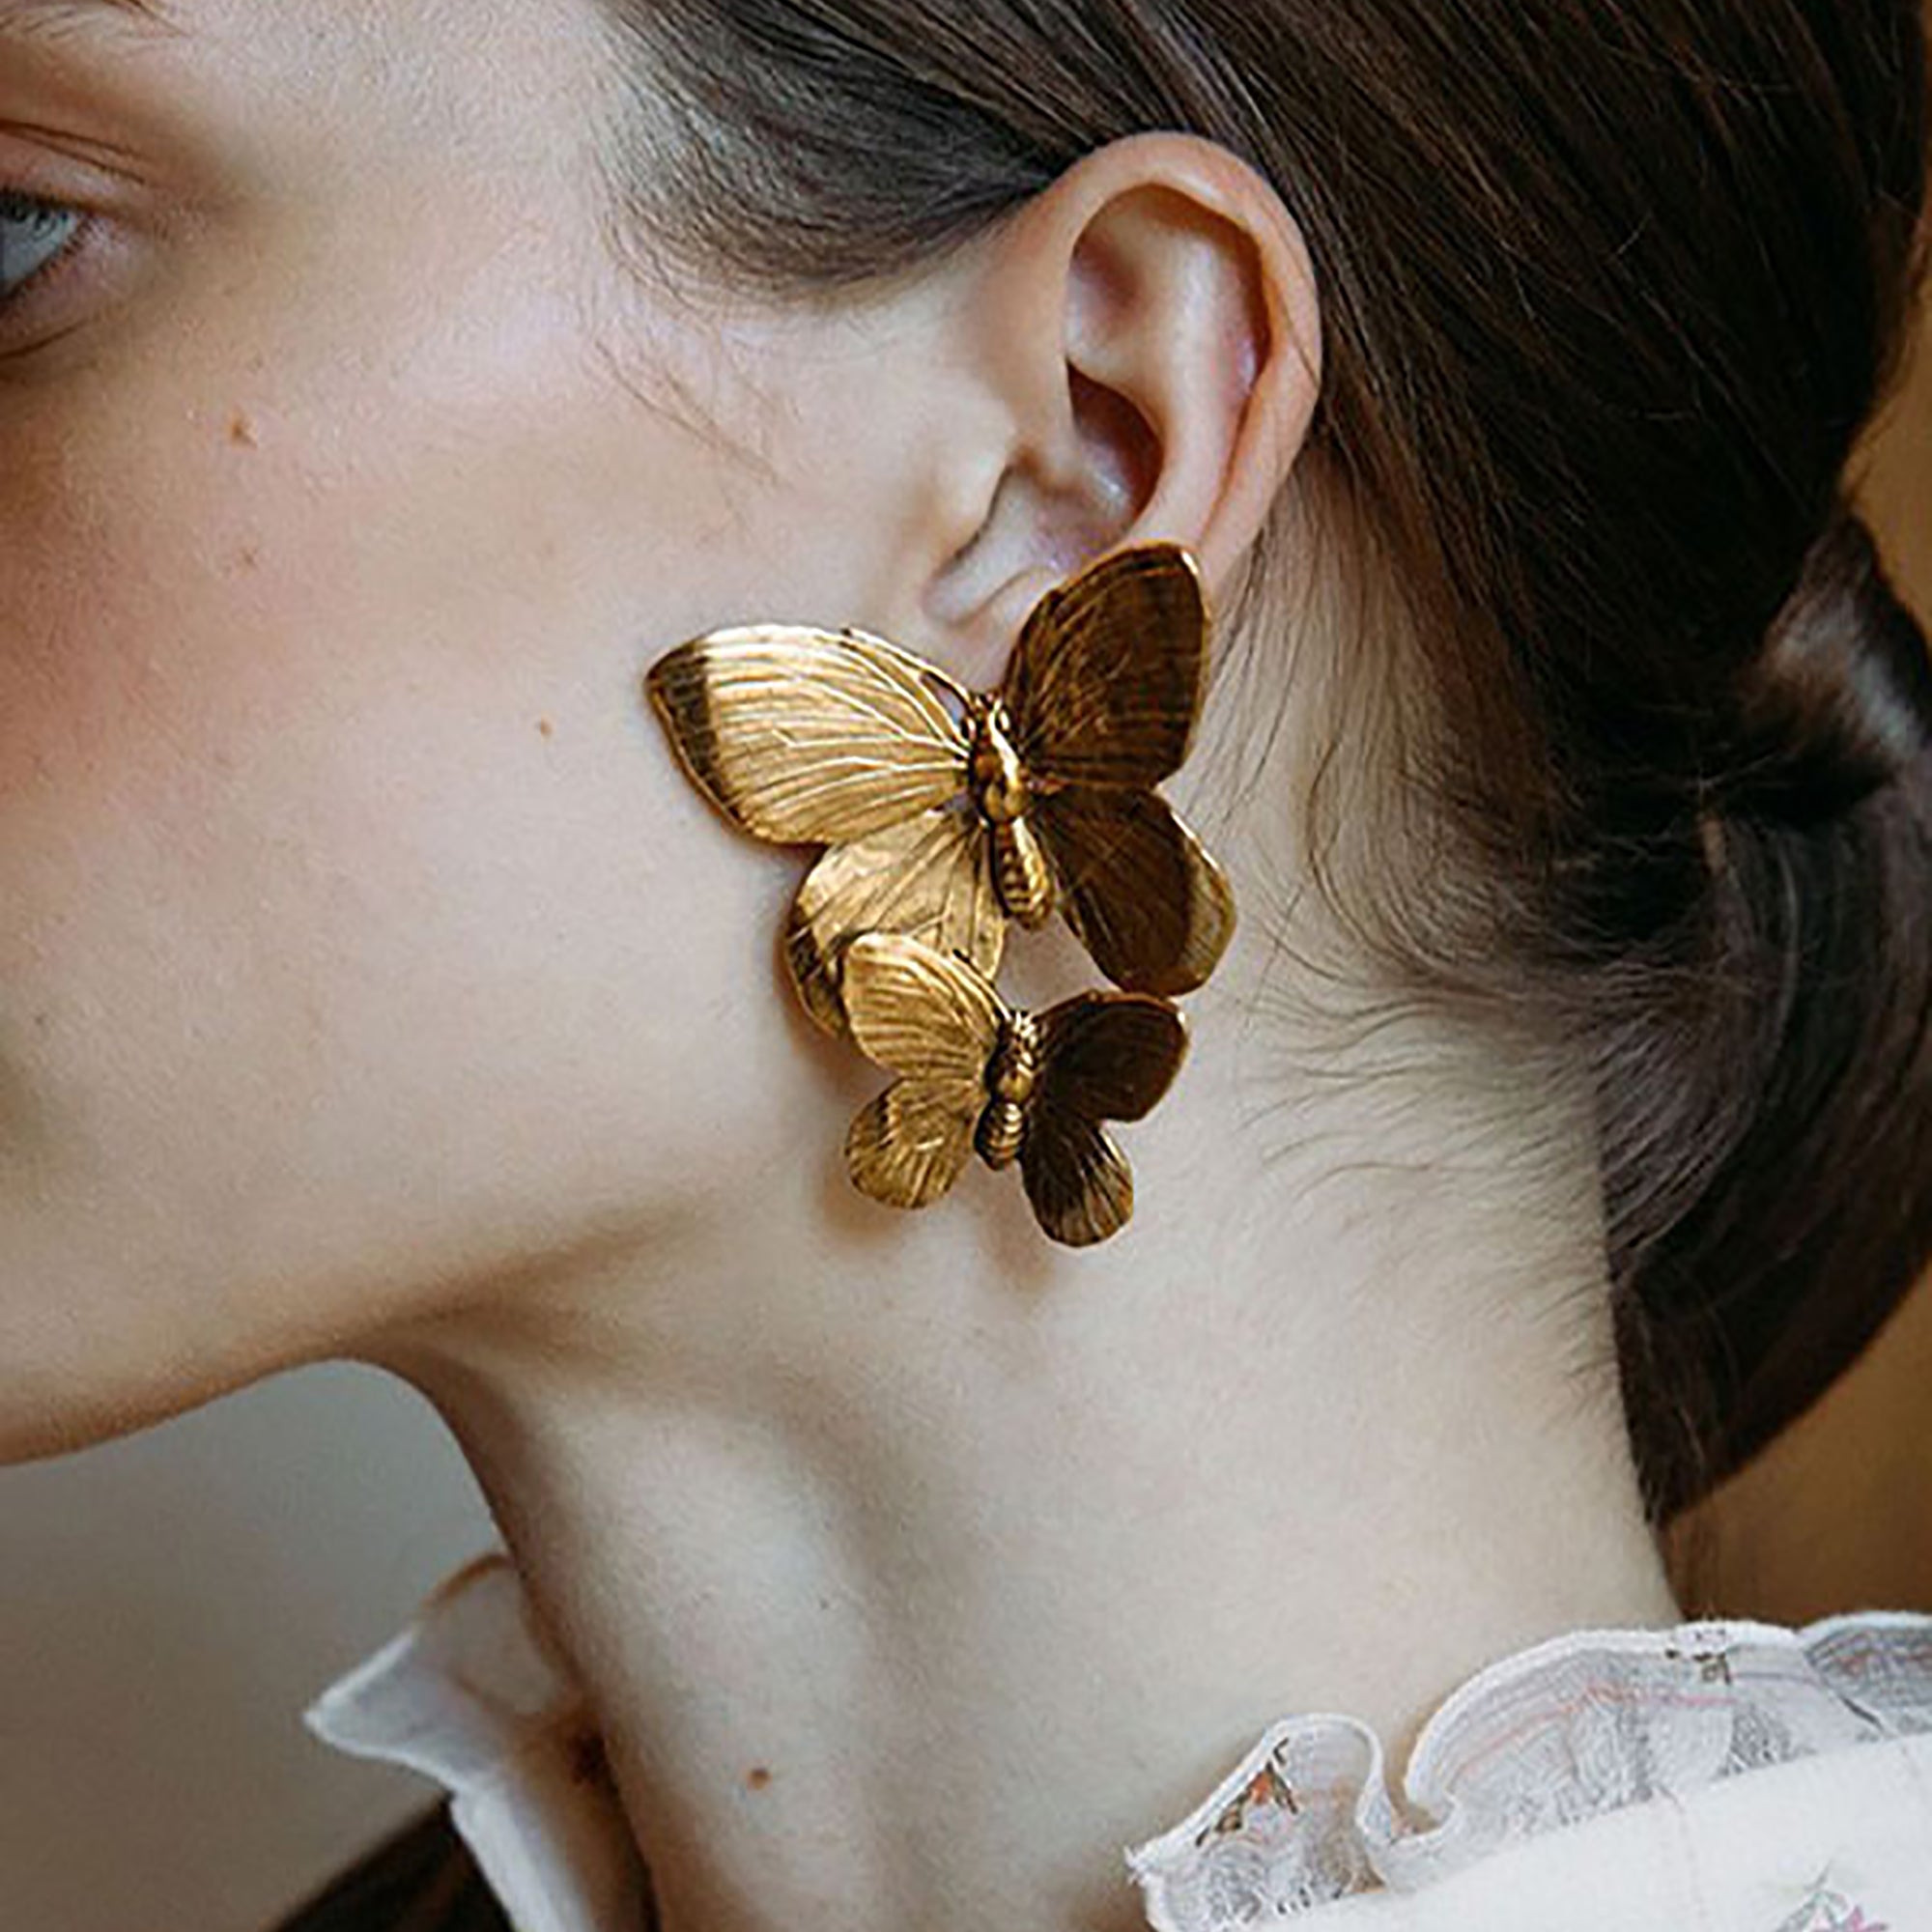 18K Gold Plated Chunky Butterfly Earrings